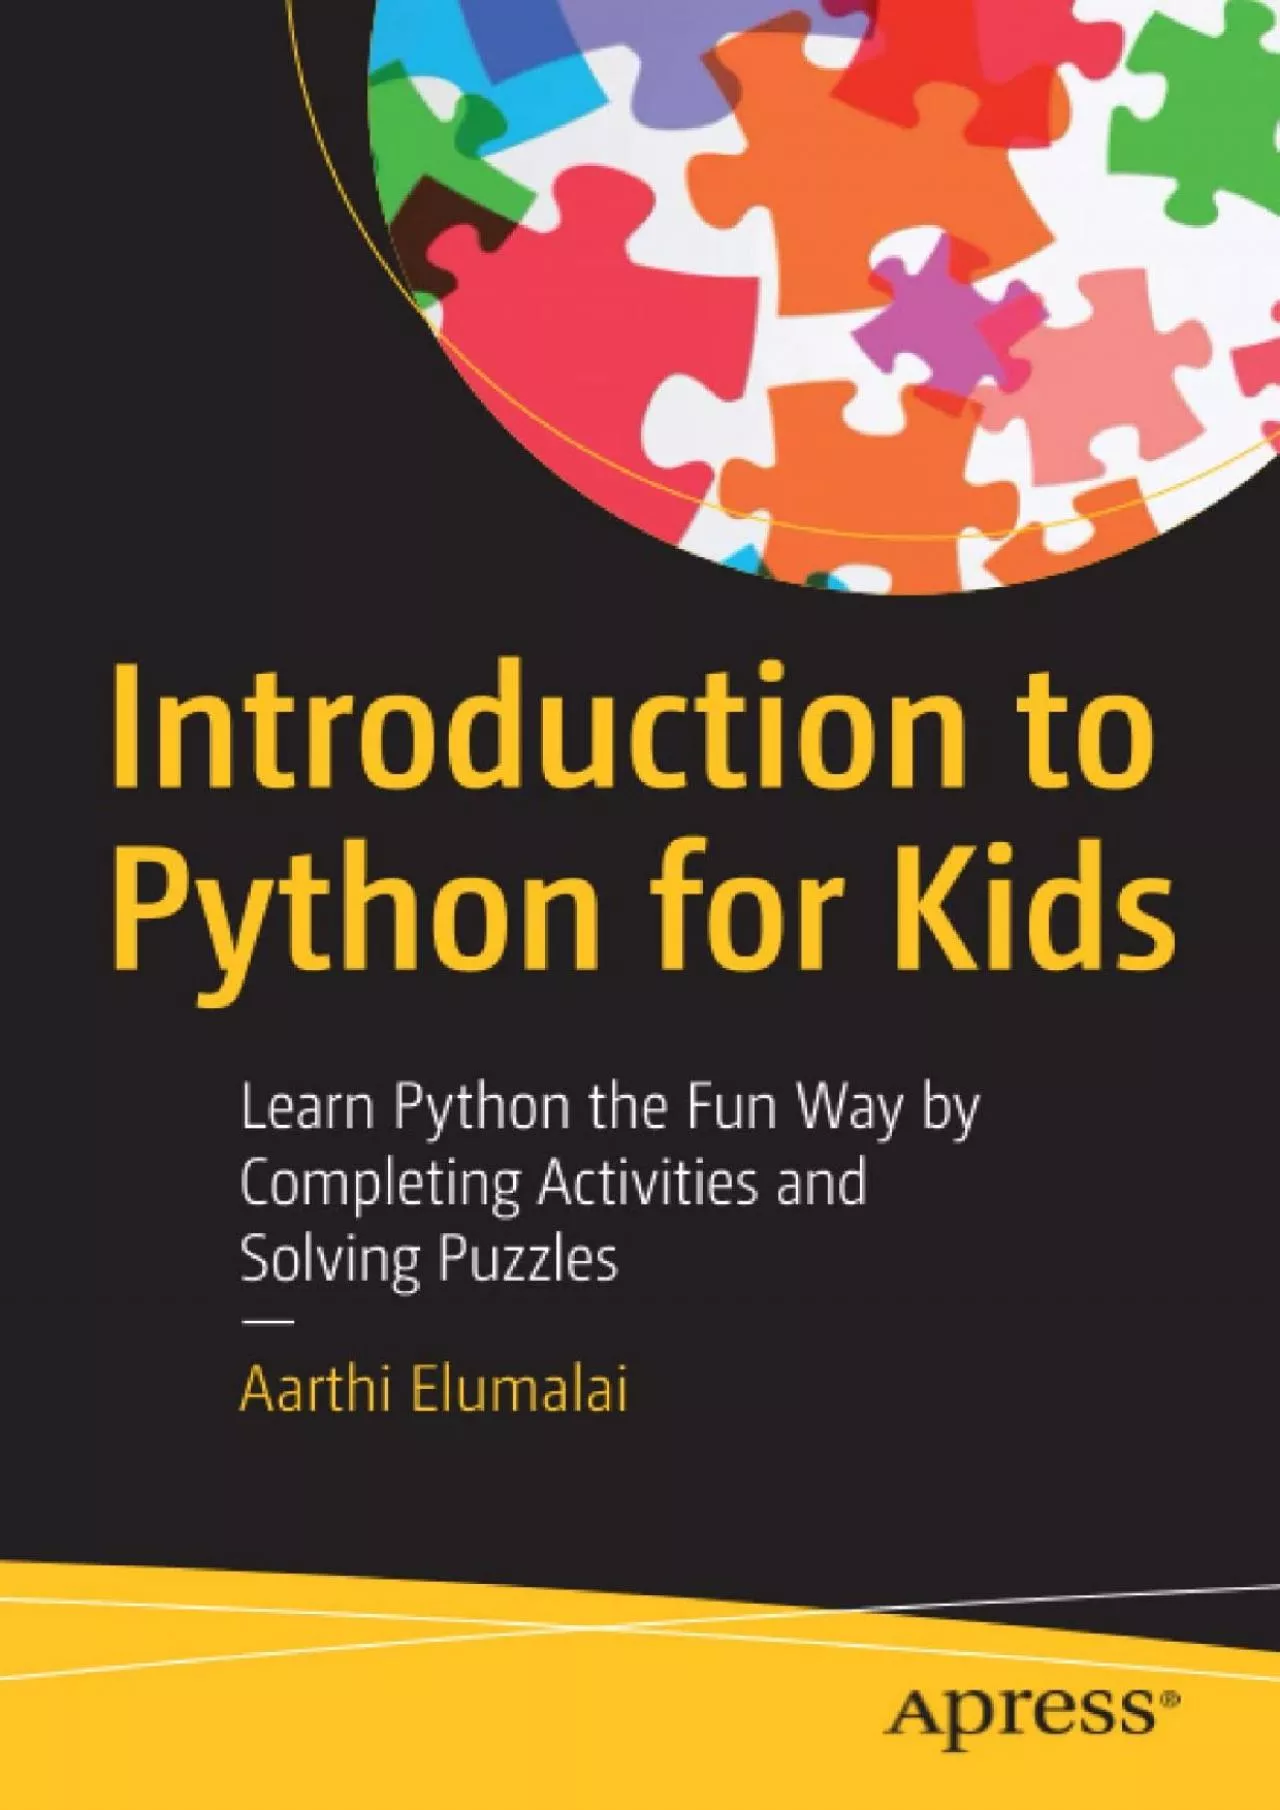 [BEST]-Introduction to Python for Kids: Learn Python the Fun Way by Completing Activities